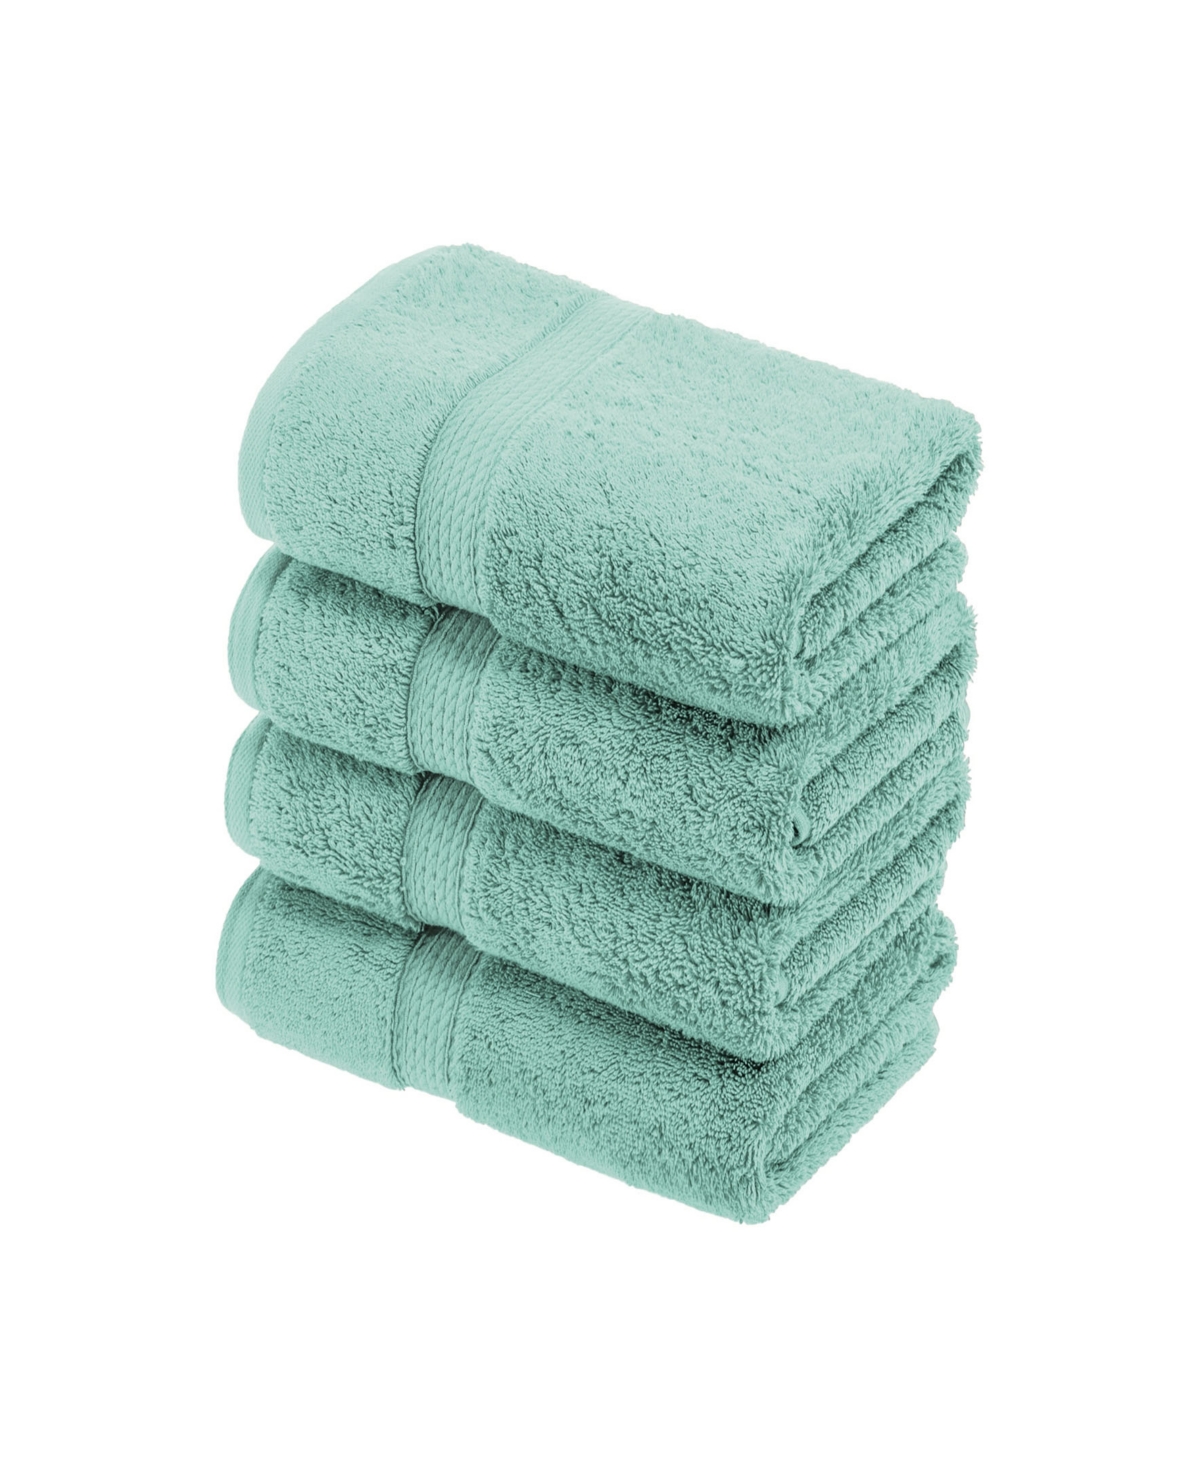 Superior Highly Absorbent 4 Piece Egyptian Cotton Ultra Plush Solid Hand Towel Set Bedding In Sea Foam